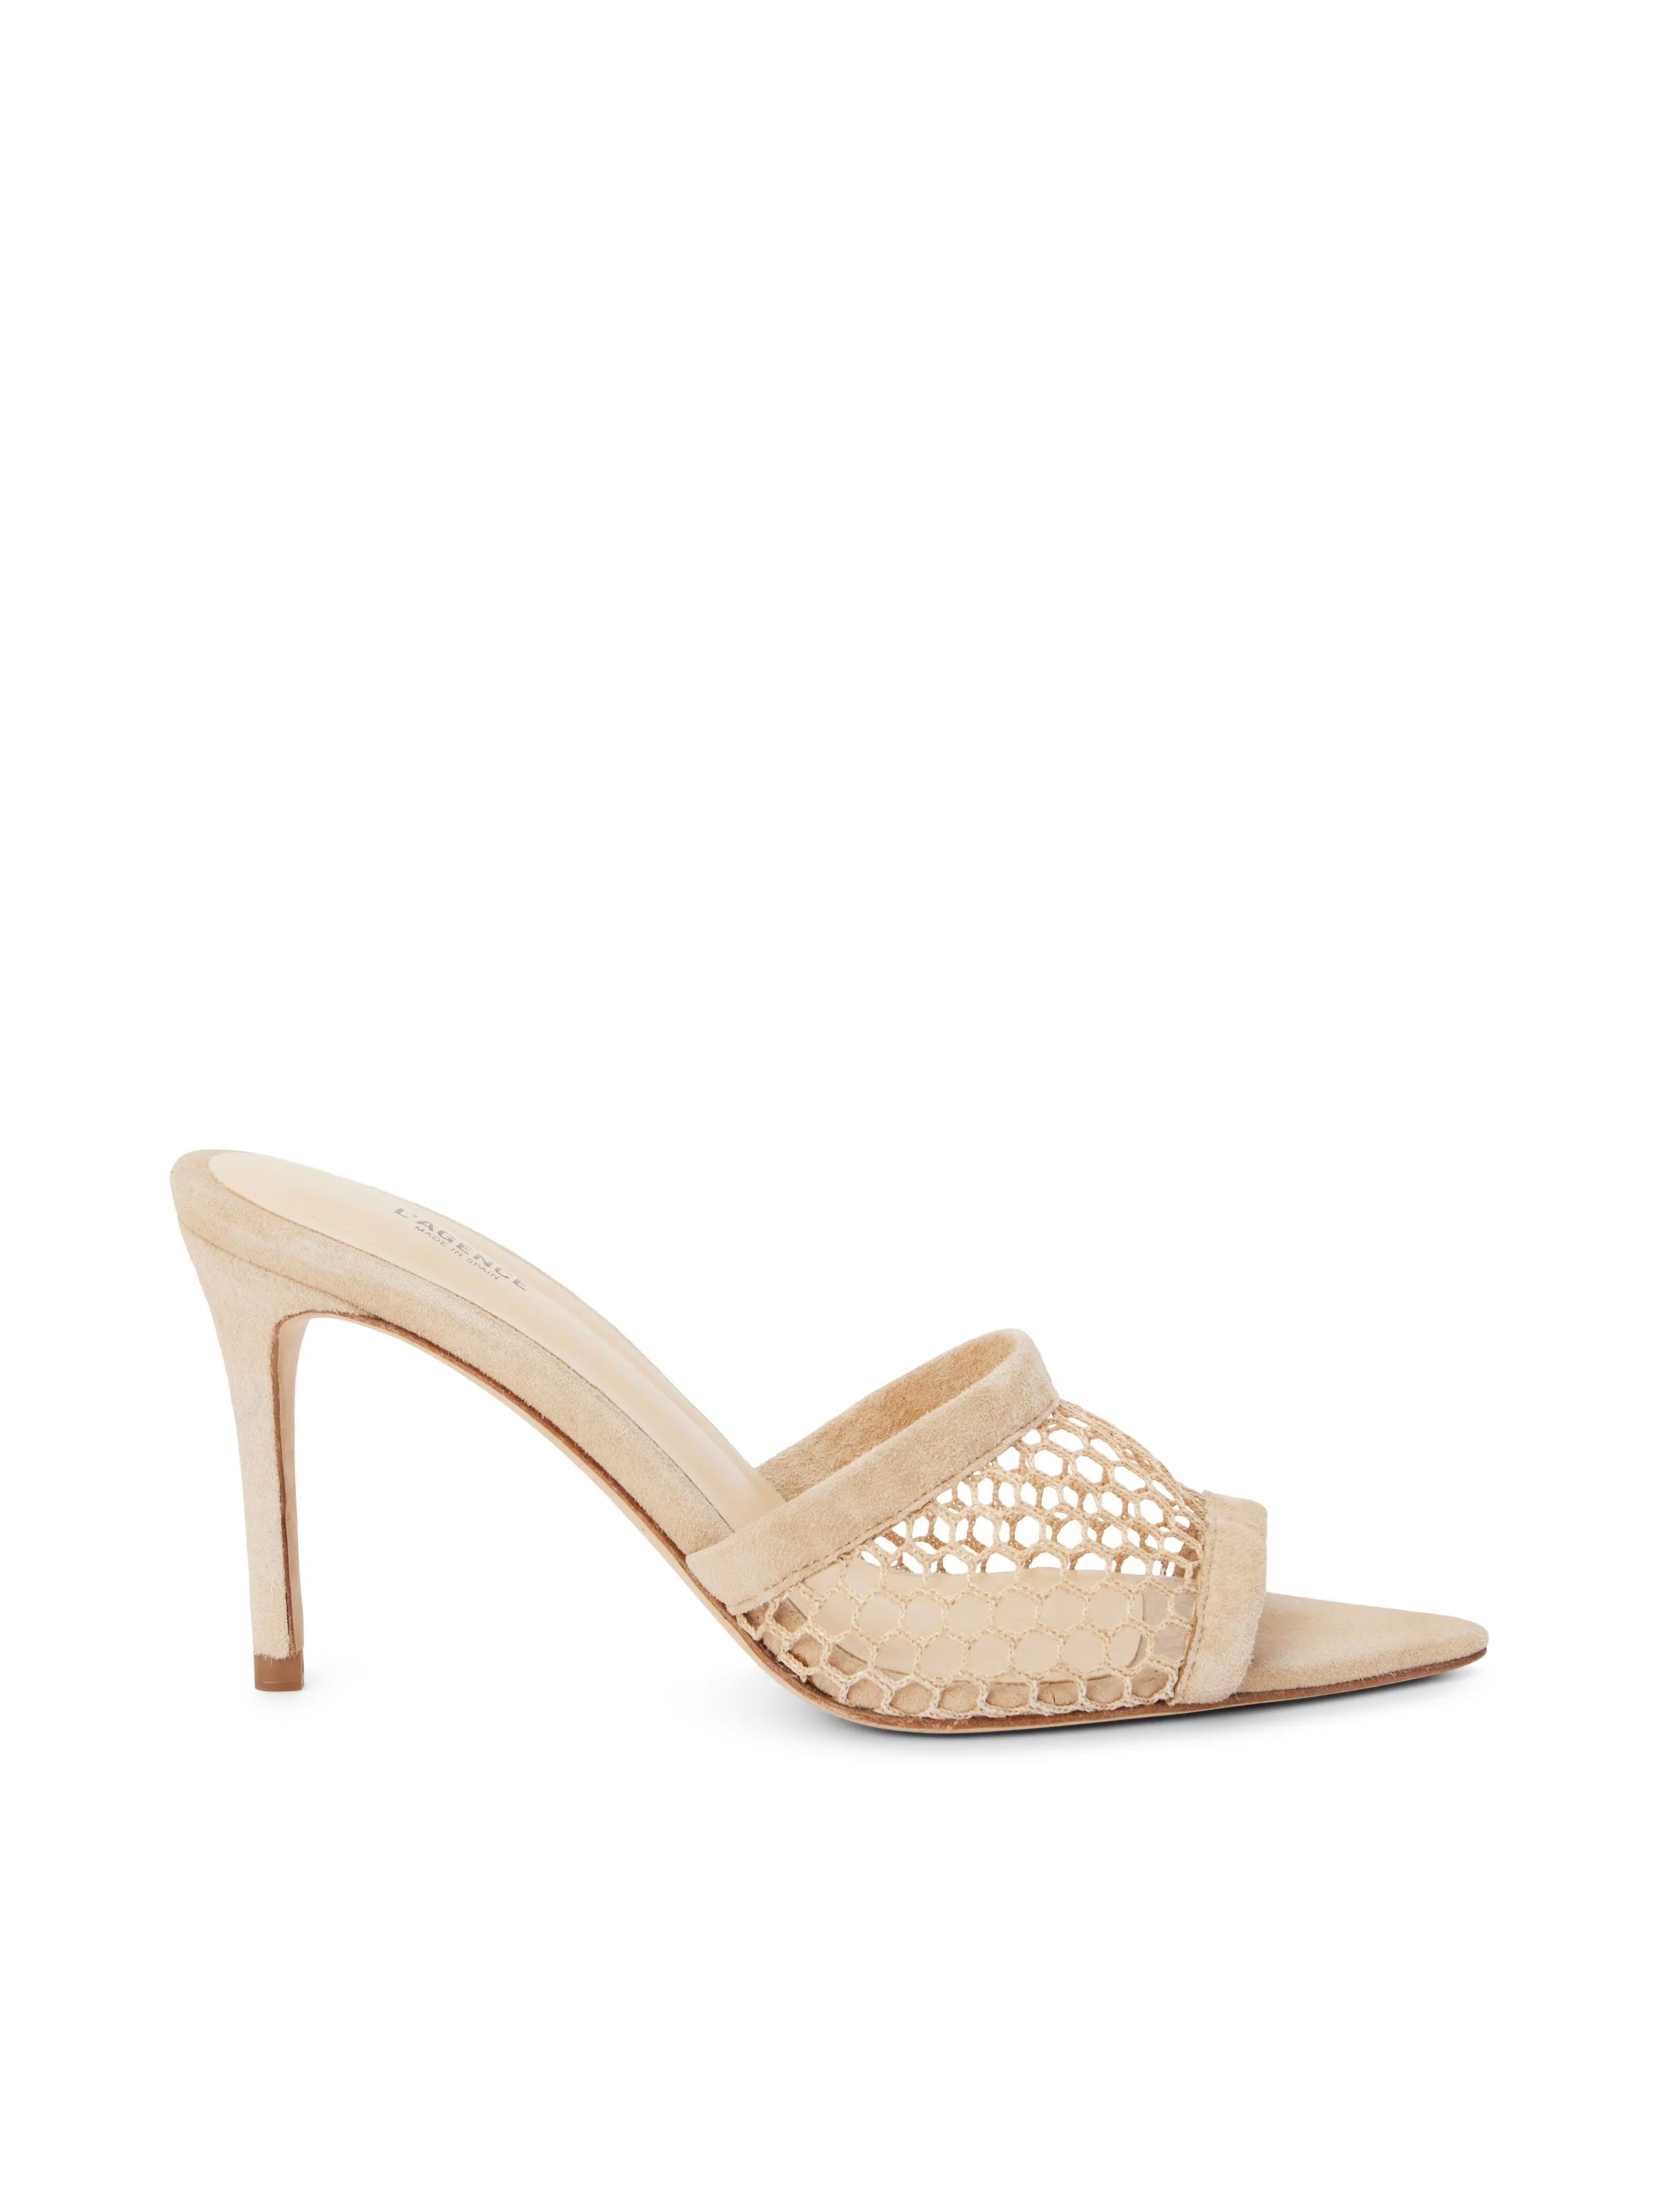 L'AGENCE Romilly Open Toe Mule in Nude Suede | L'Agence